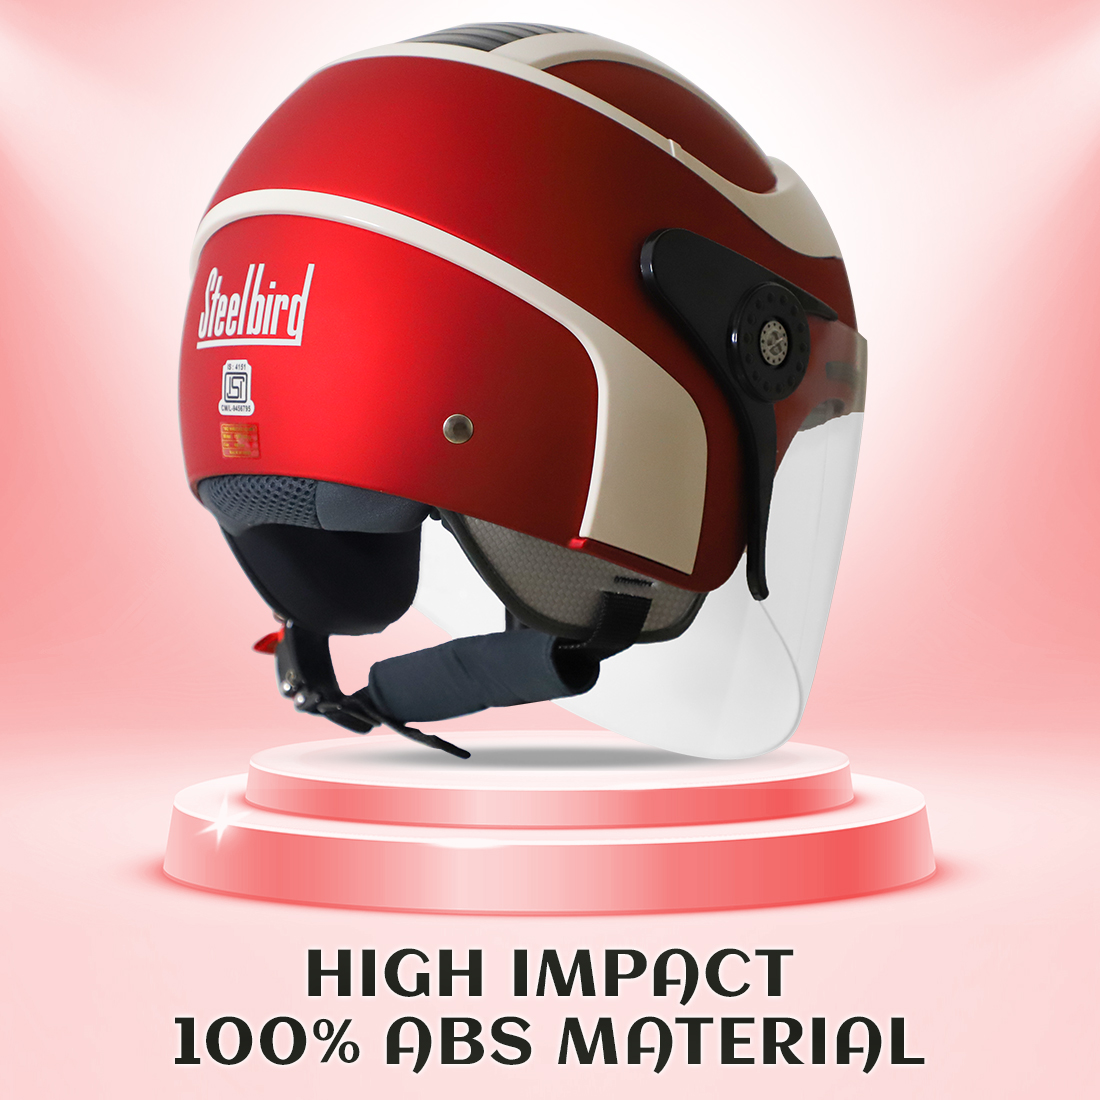 Steelbird SB-29 AER ISI Certified Helmet For Men And Women (Glossy Cherry Red Off White With Clear Visor)